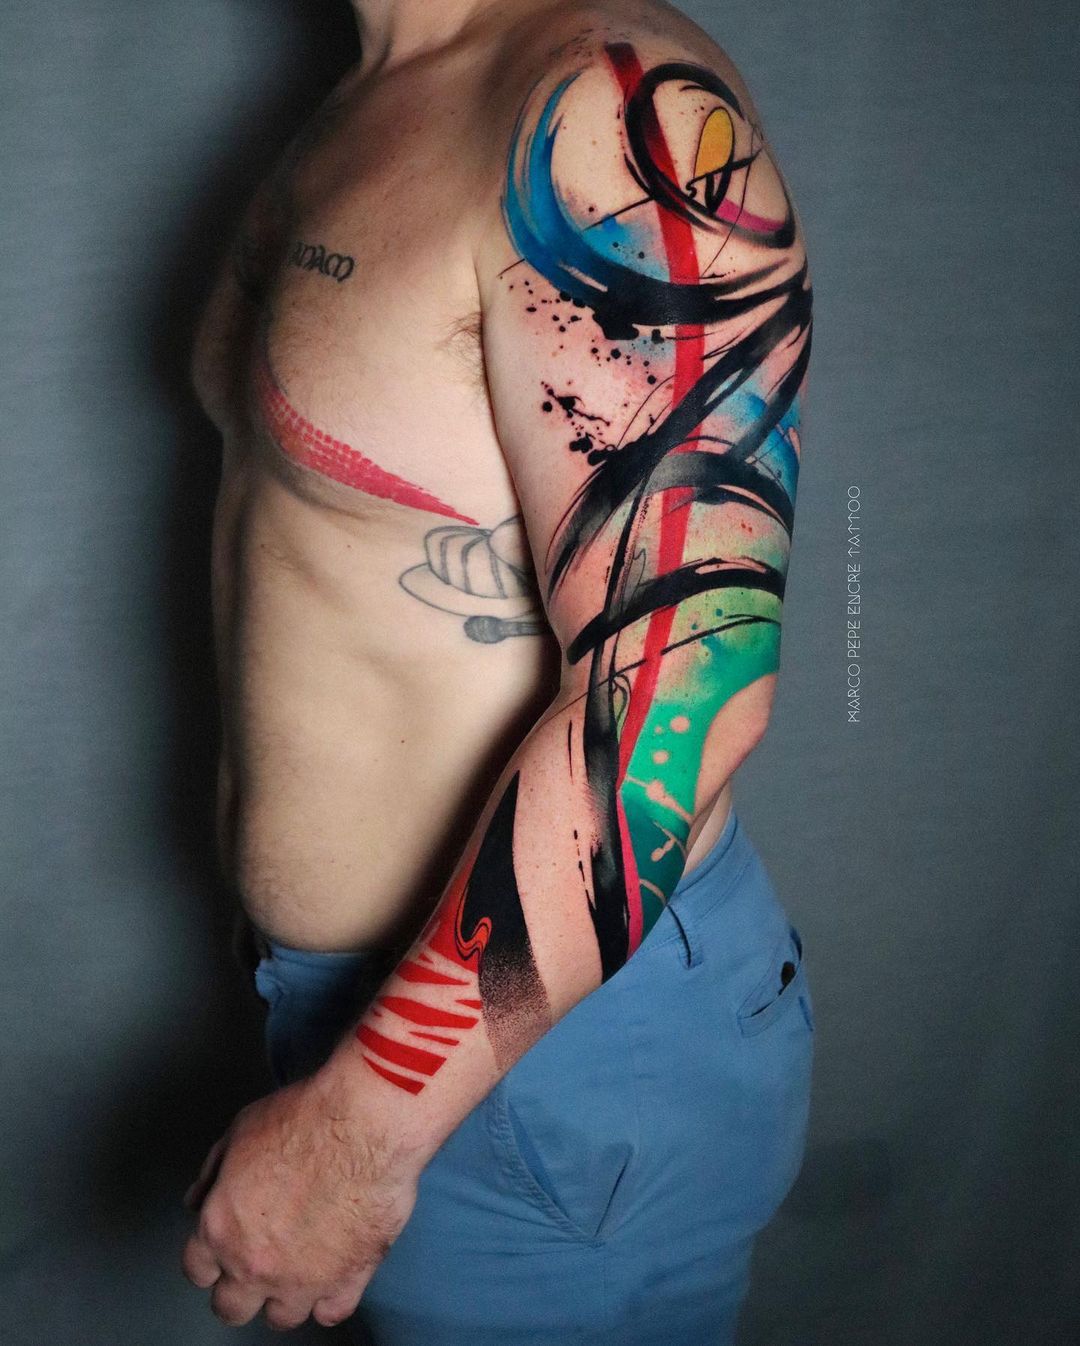 Abstract Watercolor sleeve tattoo by Electronic-Sin on DeviantArt